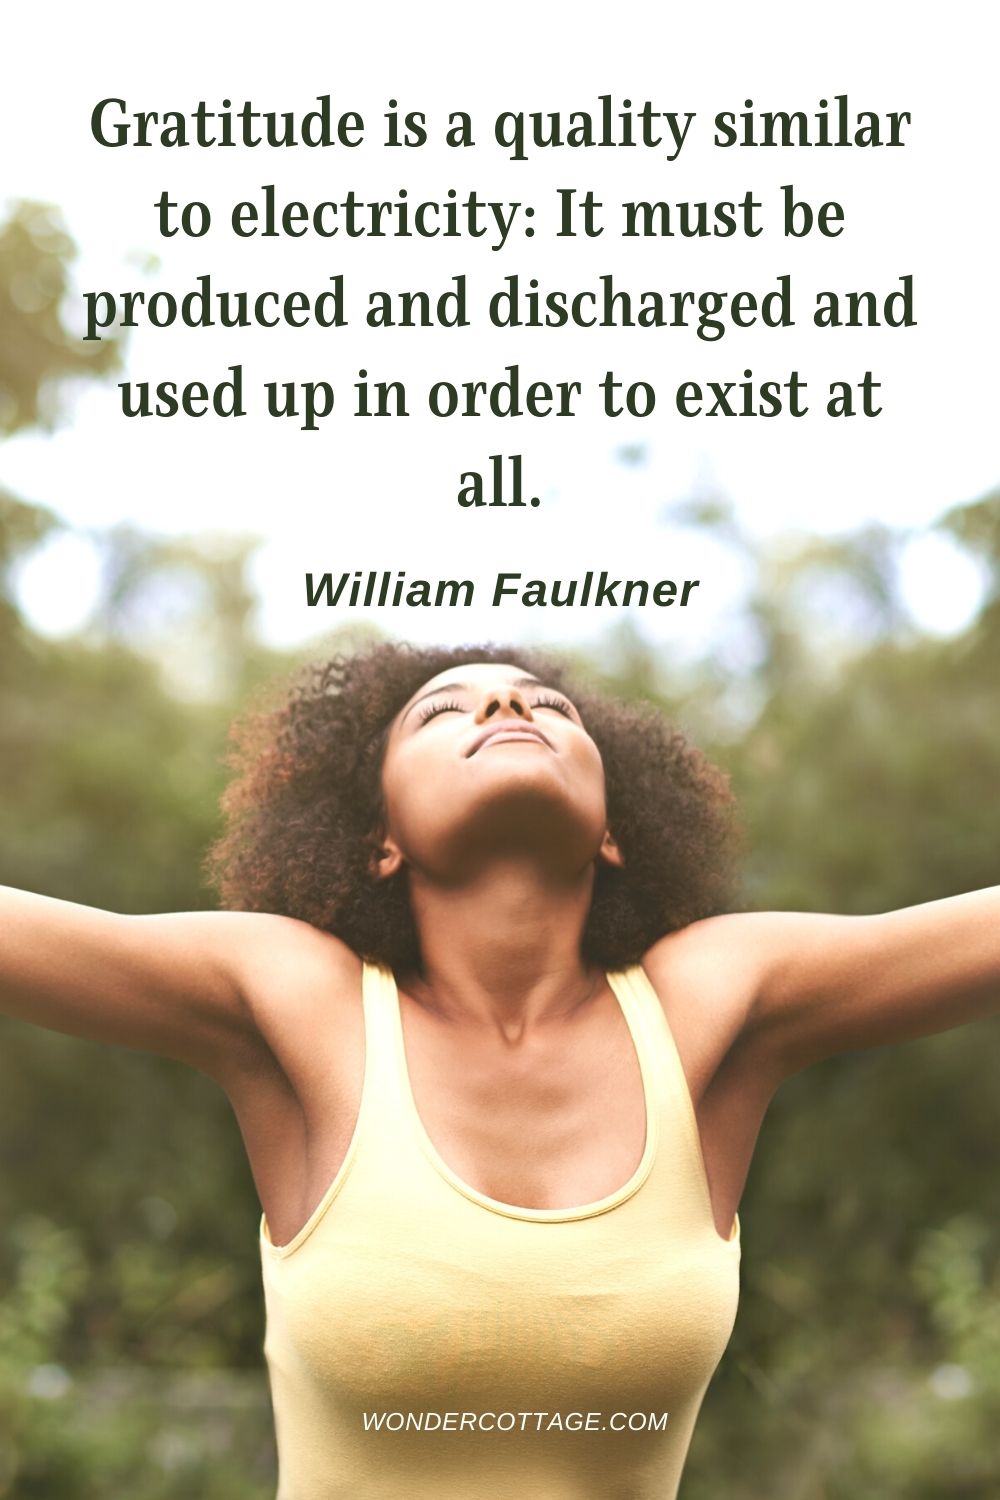 Gratitude is a quality similar to electricity: It must be produced and discharged and used up in order to exist at all. William Faulkner - Thanksgiving Quotes With Images